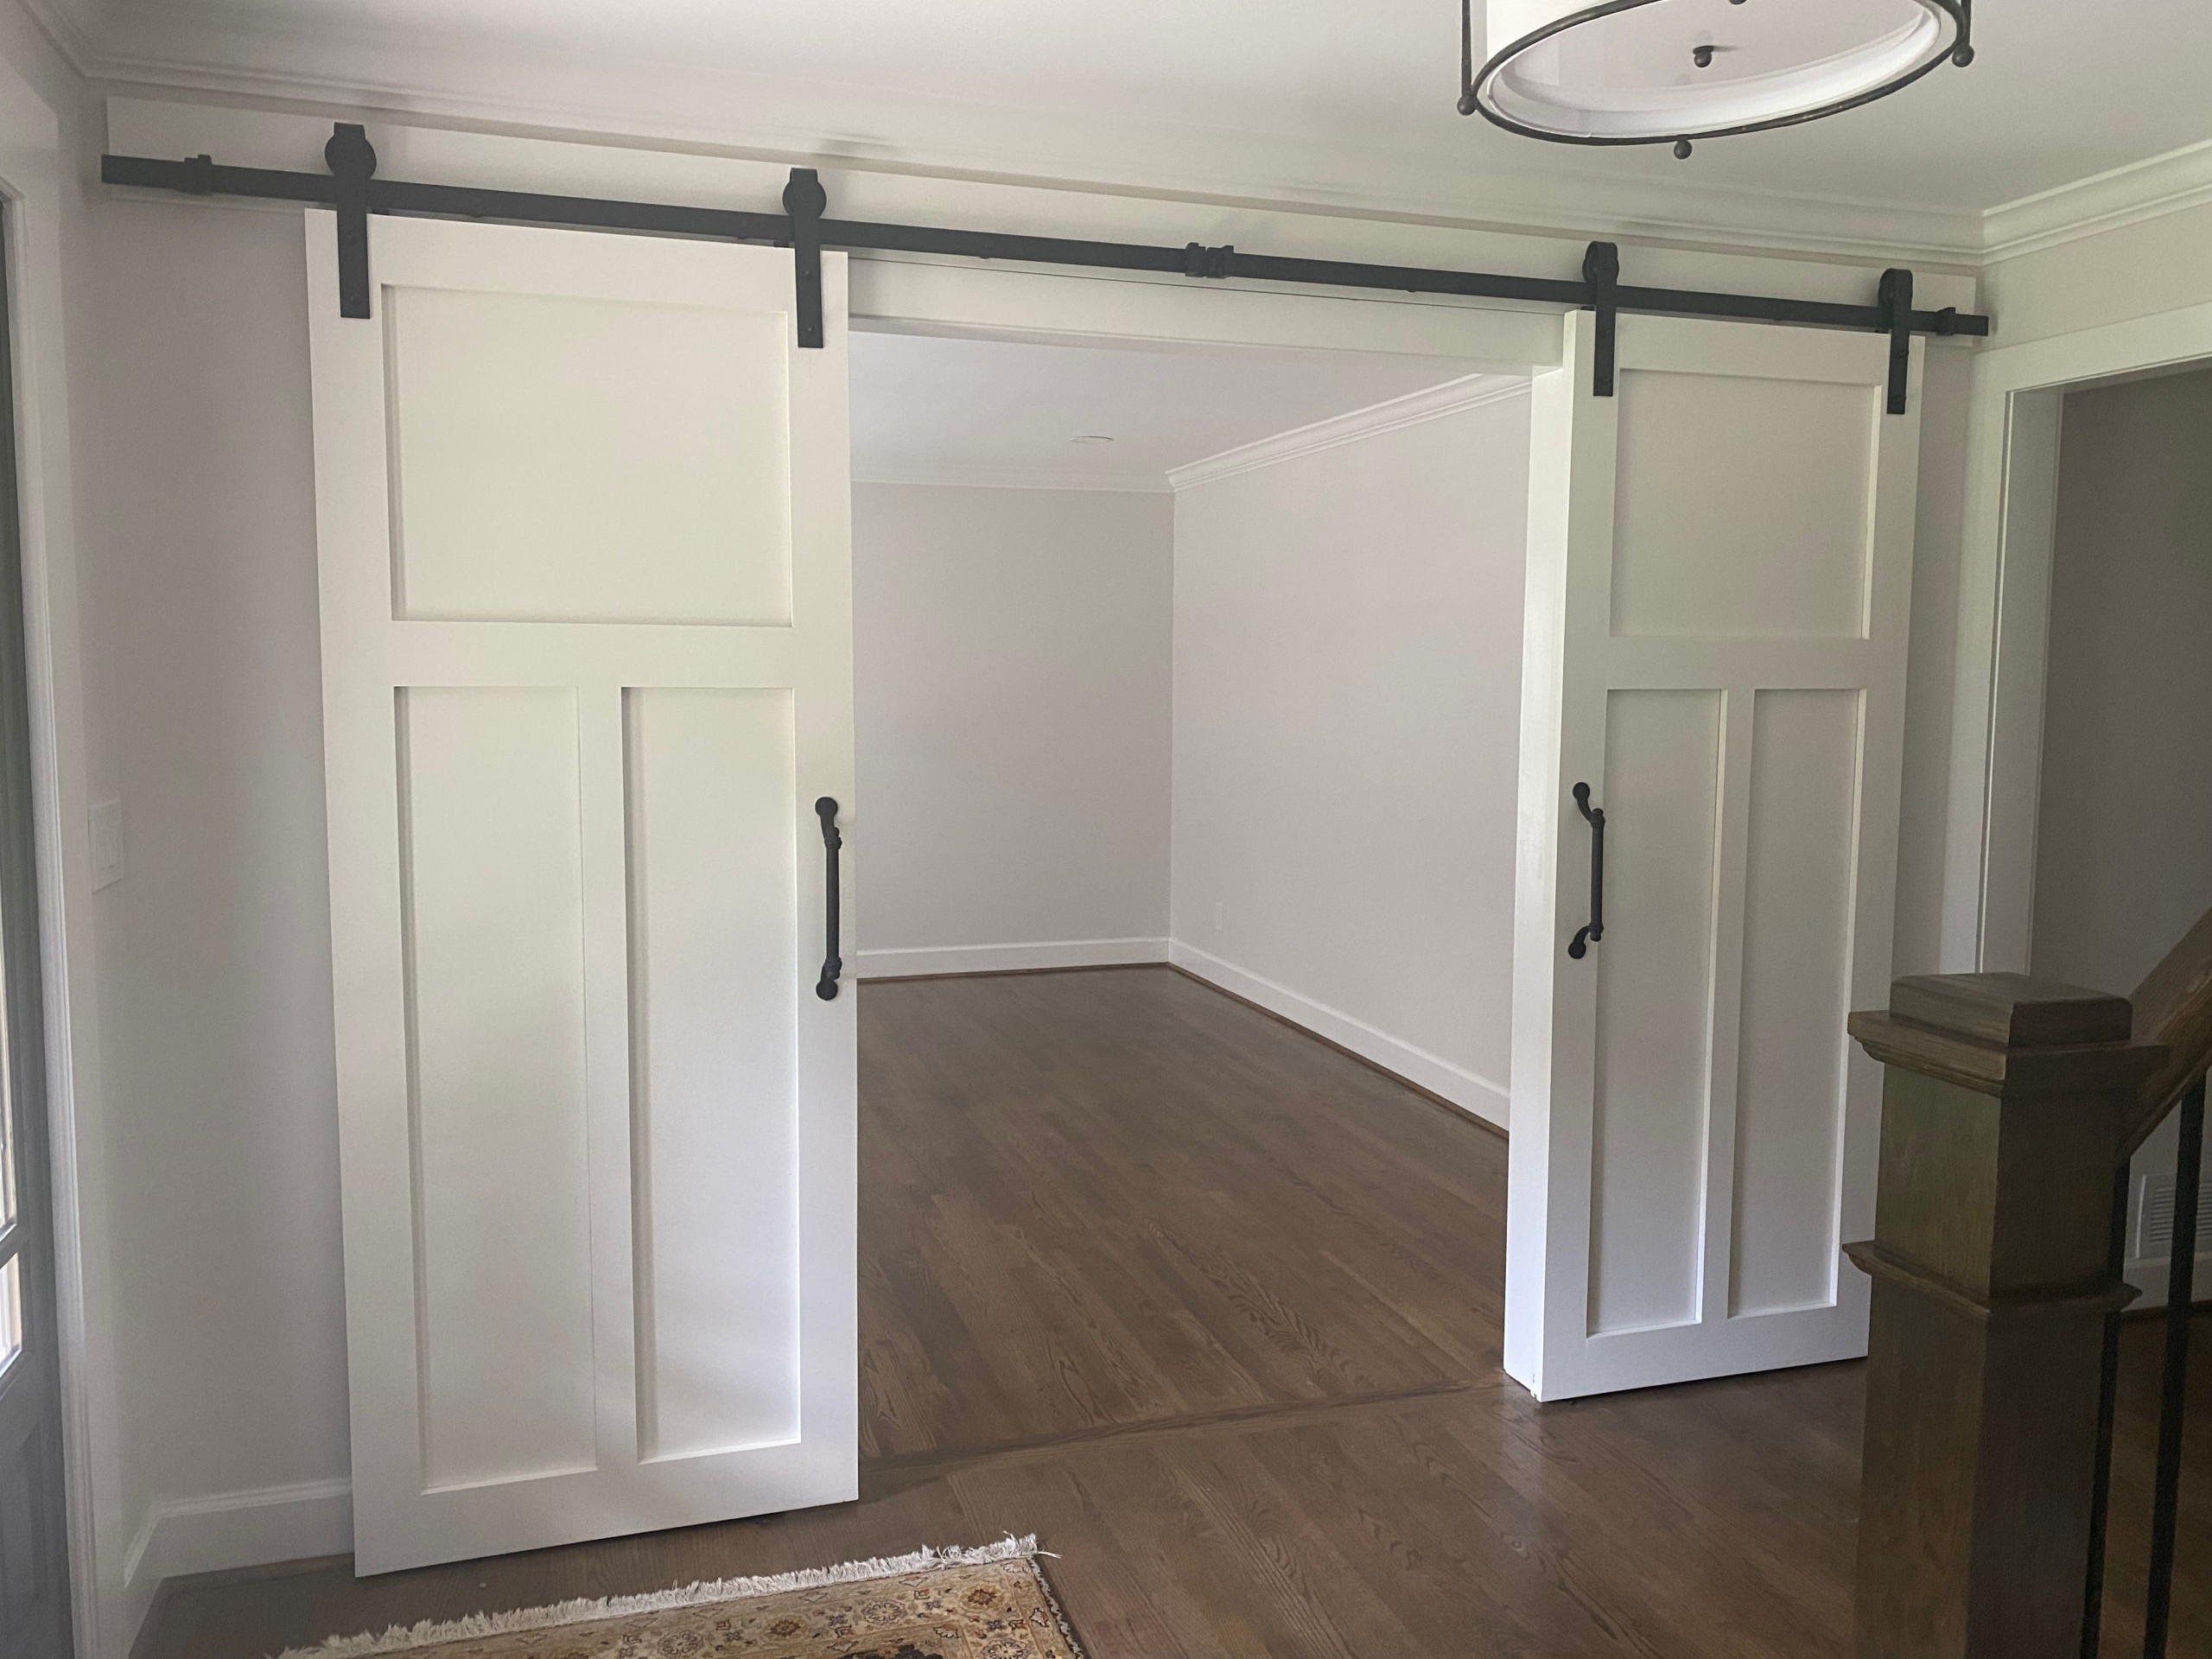 Barn doors added to create privacy in the home office